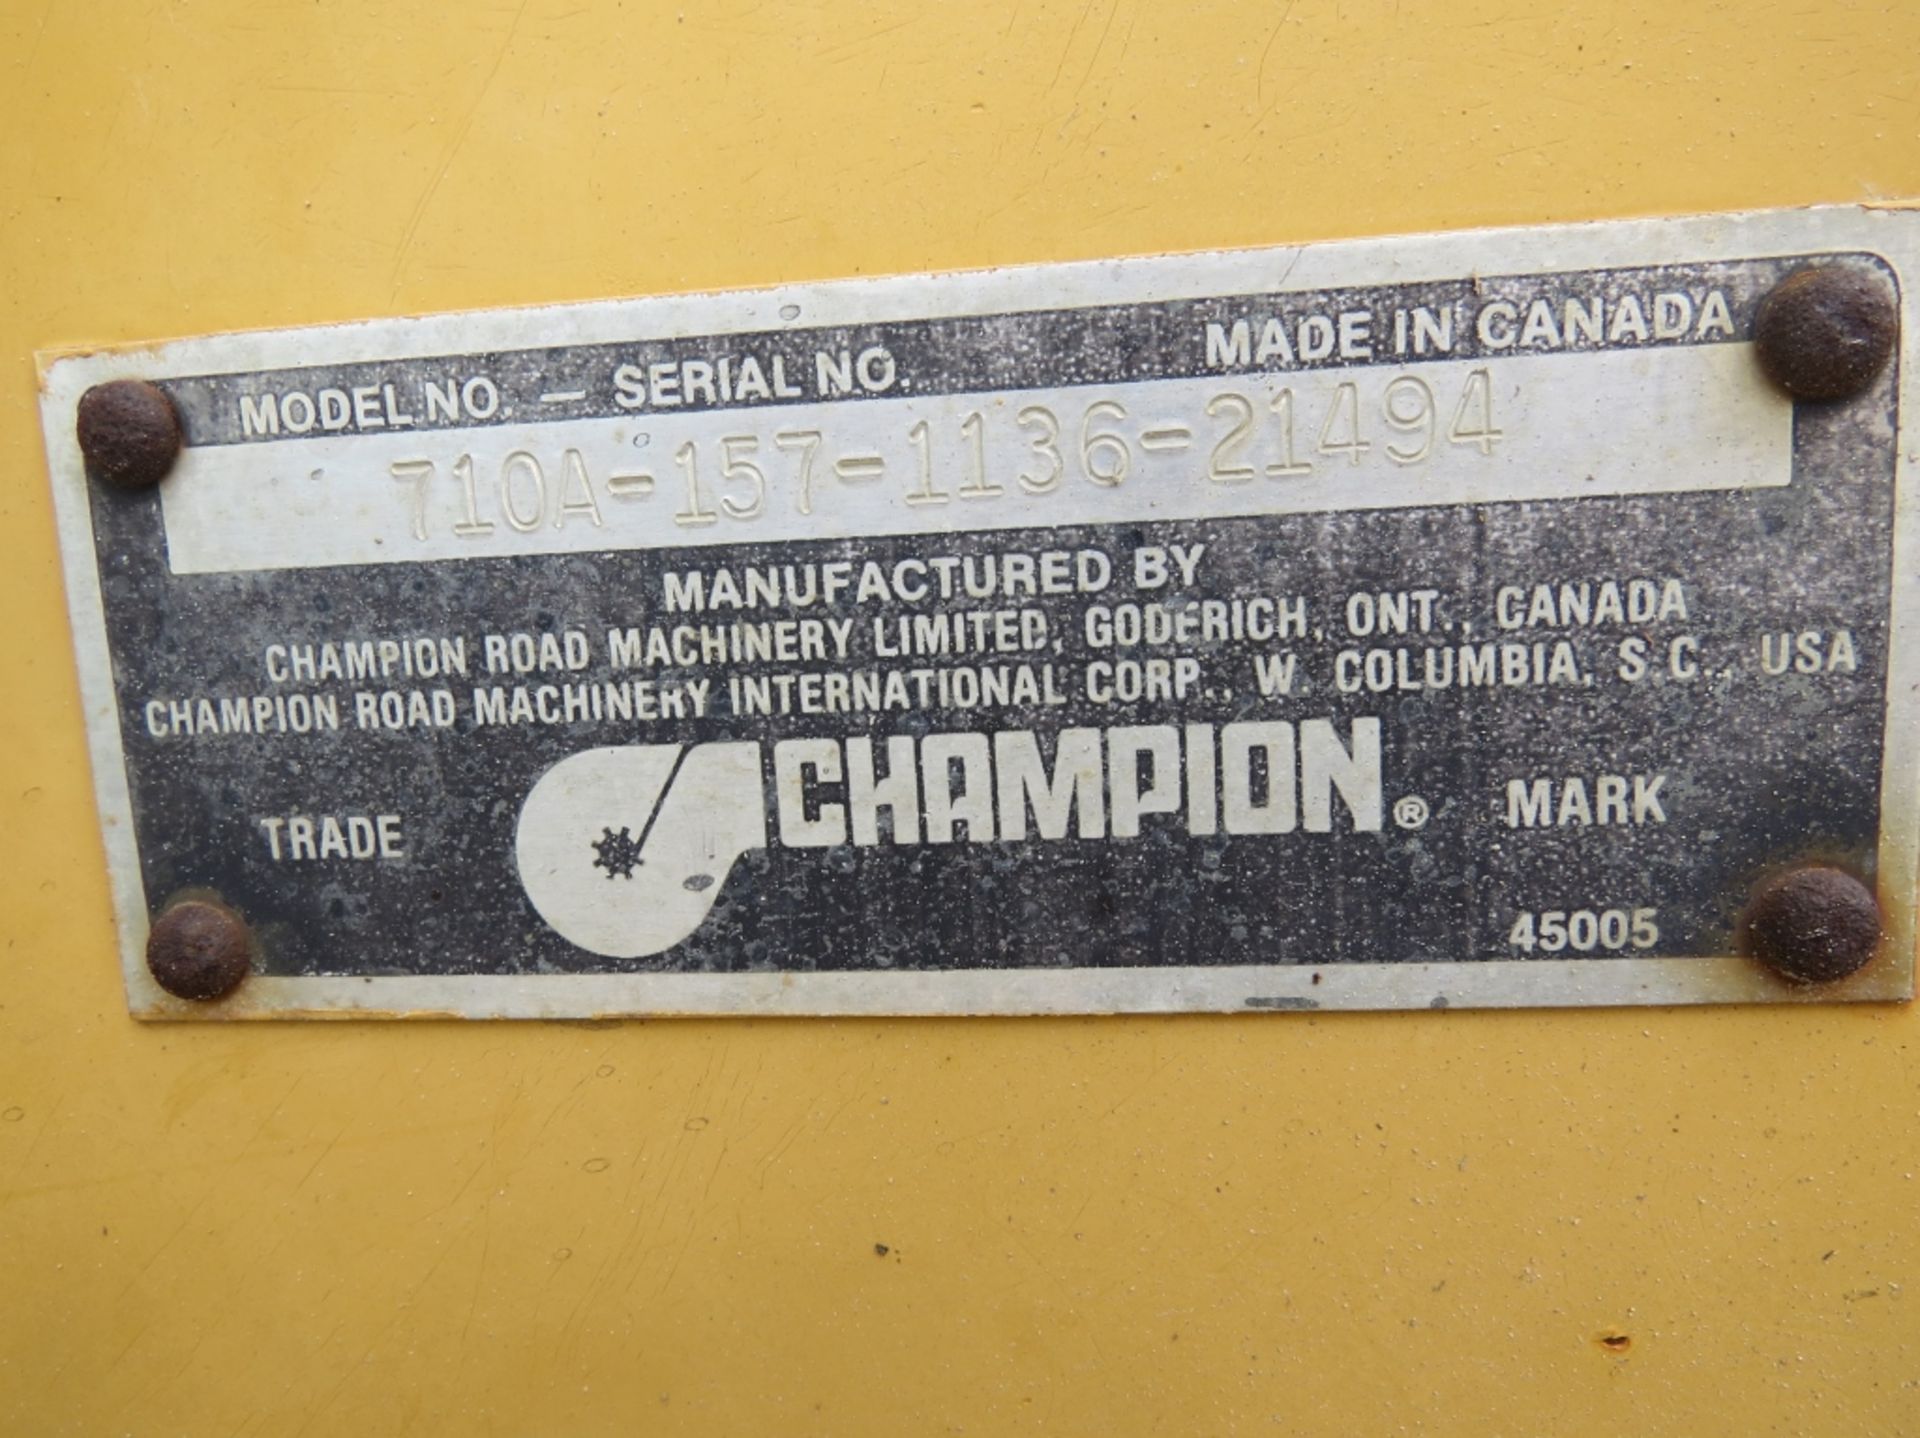 Champion 710A Series 3 Motorgrader 12' Mold Board SCARFIRE 710A-157-1136-21494 5863 hrs showing - Image 5 of 11